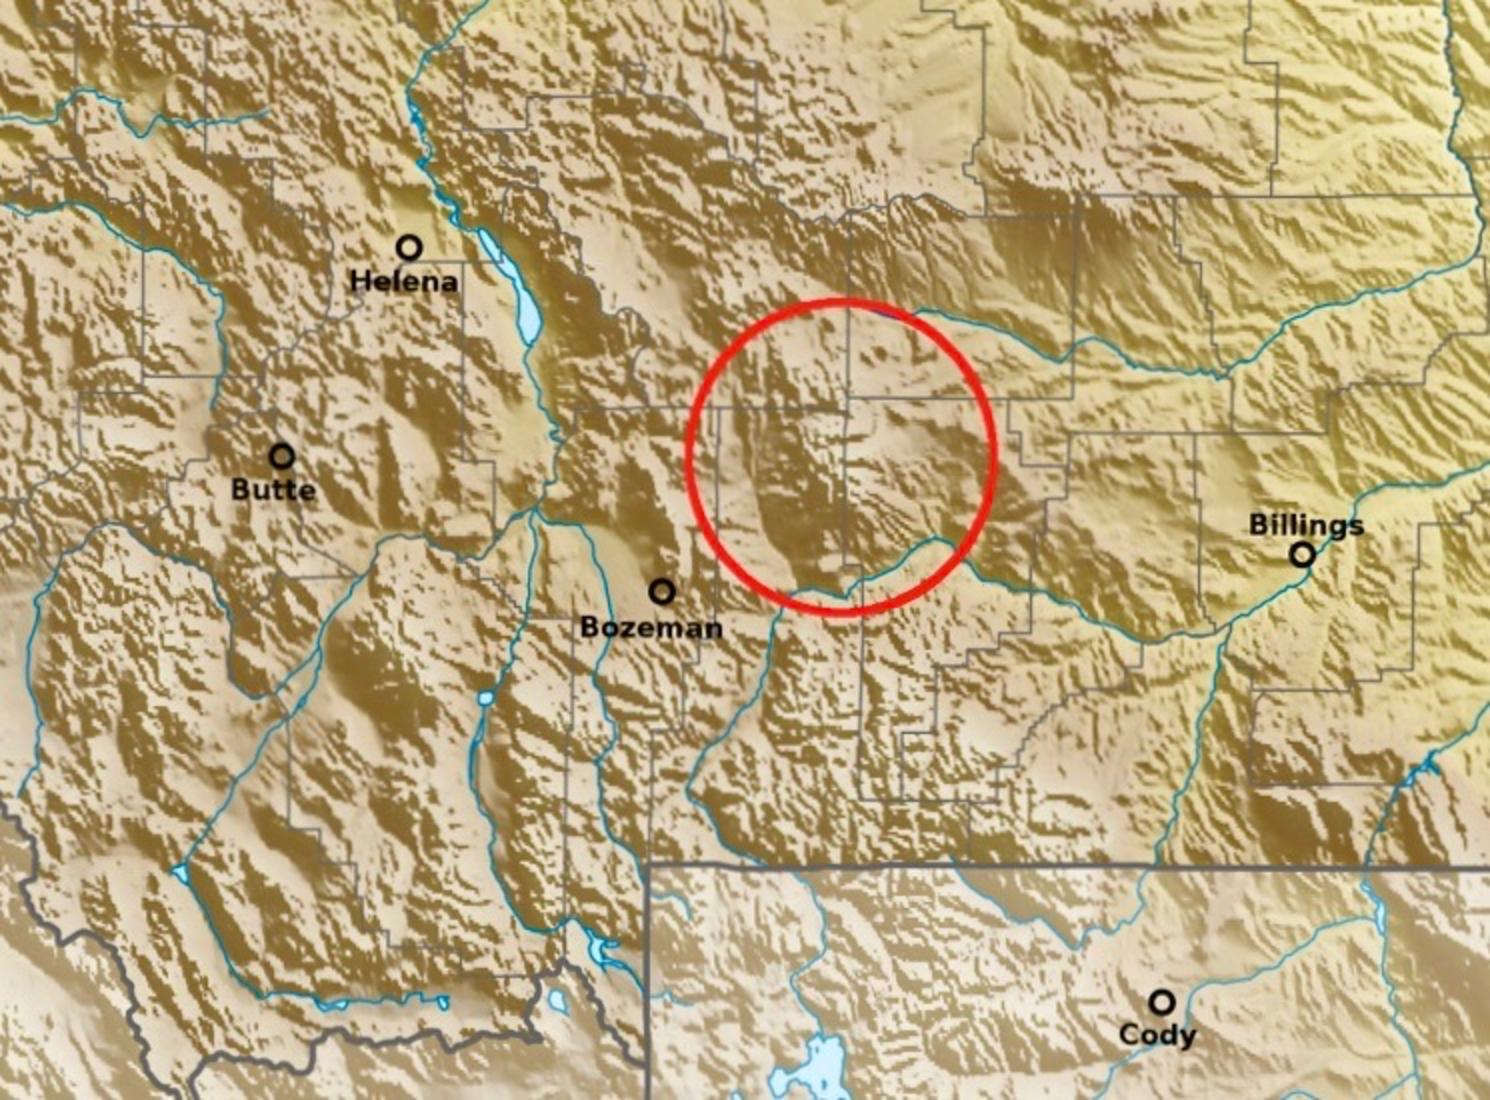 Red circle shows location of Crazies as island mountain range. Click on image to enlarge. Graphic courtesy Creative Commons